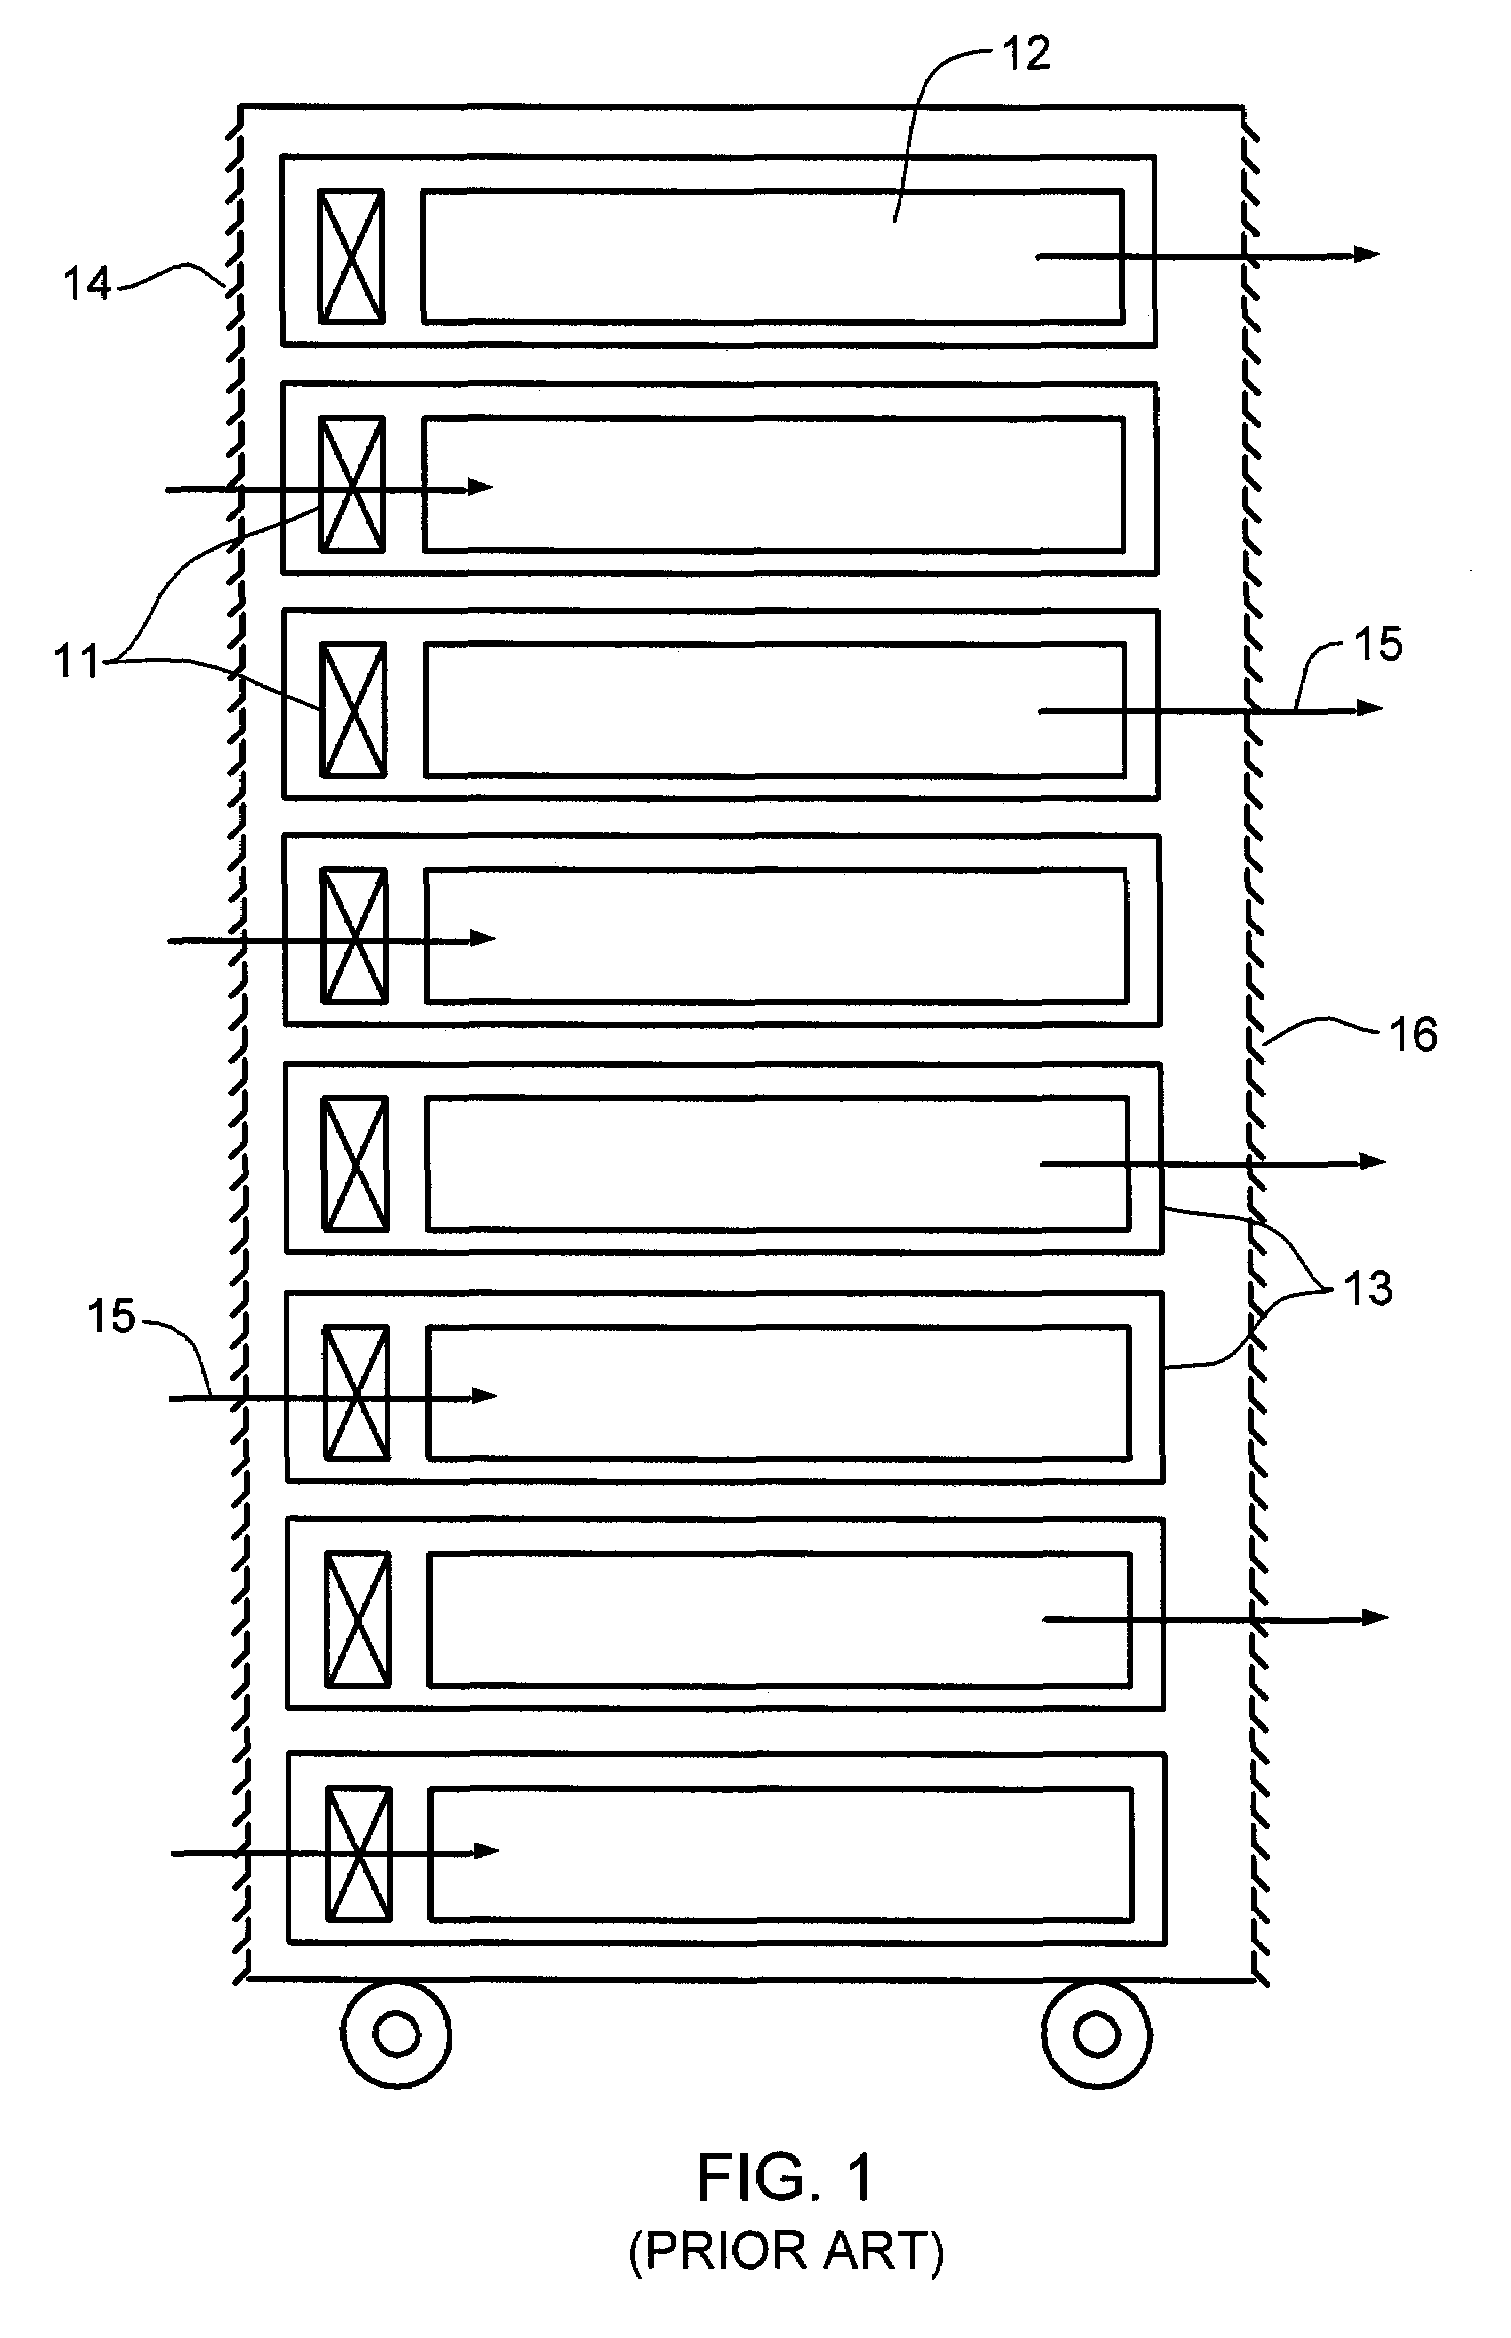 Cooled electronics system and method employing air-to-liquid heat exchange and bifurcated air flow